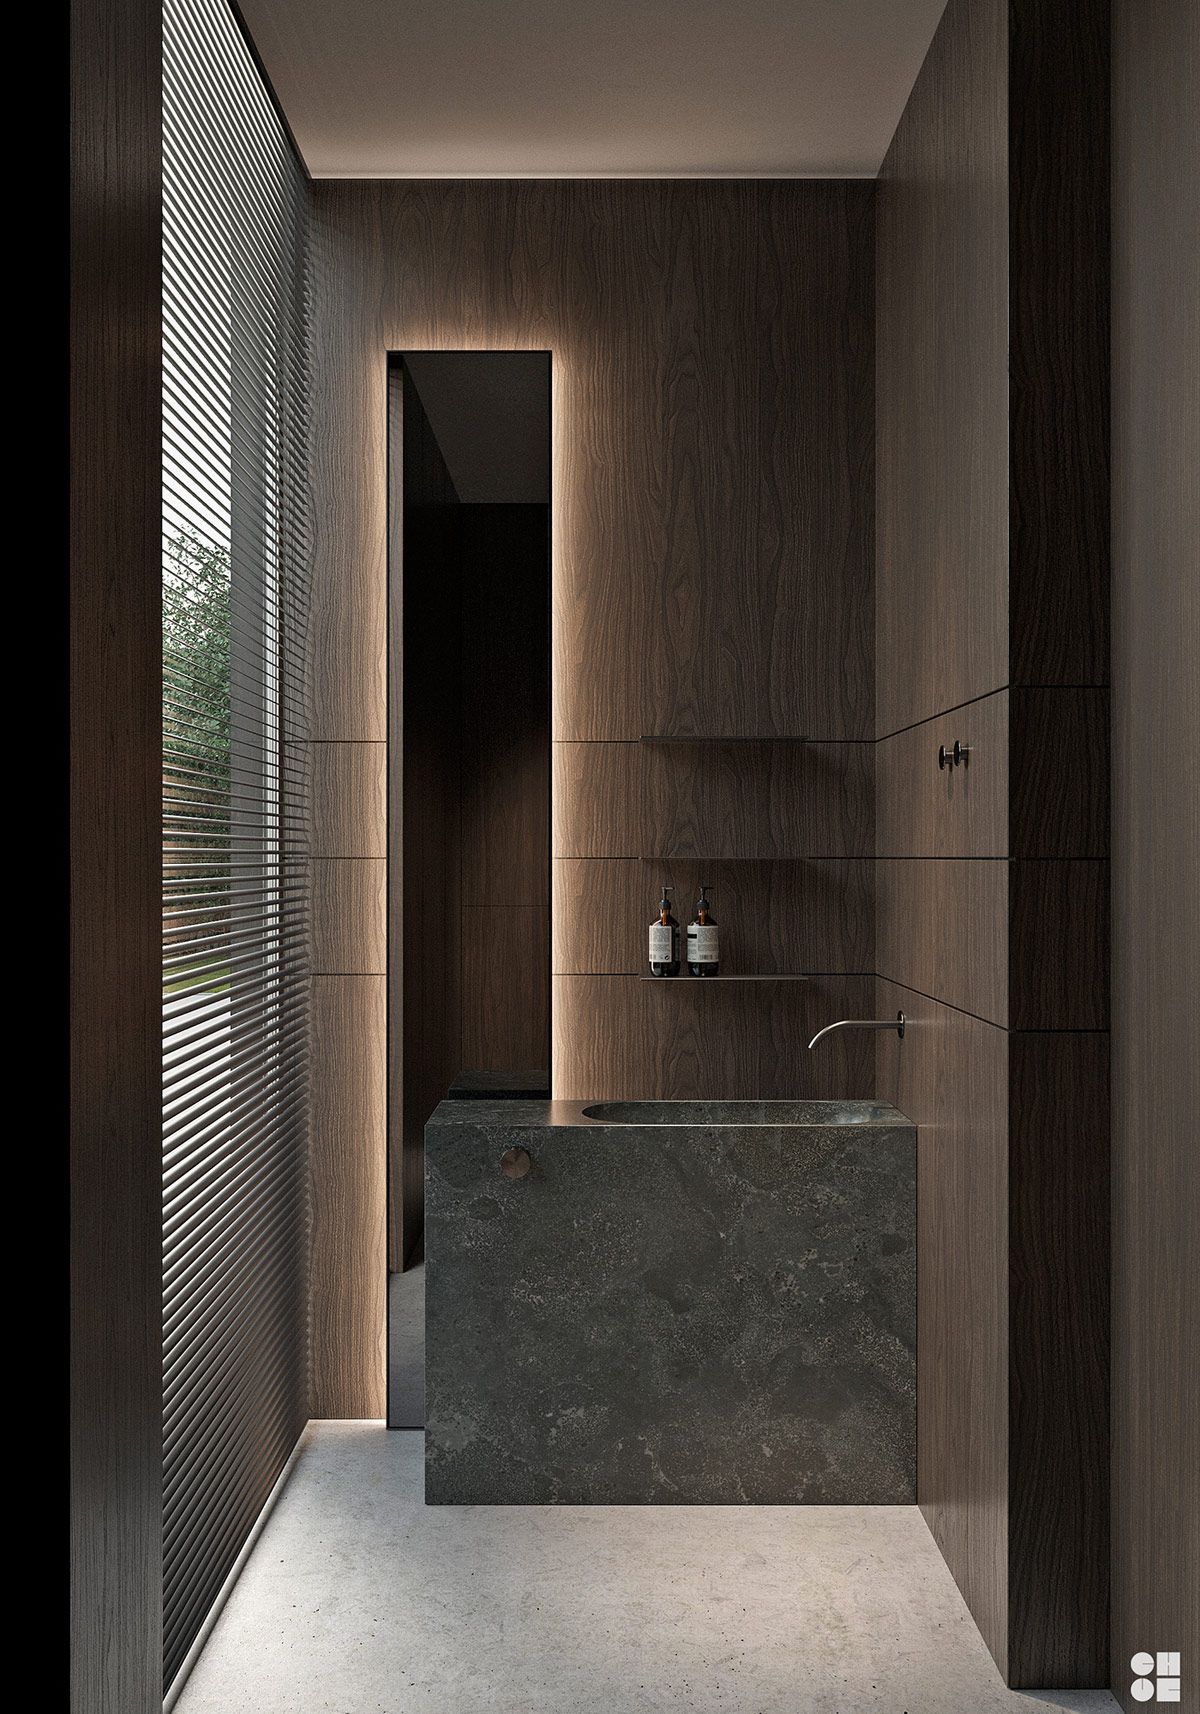 /upload/images/tin-tuc/guong-lavabo/seductive-belgian-home-interior-with-floor-plans-.jpg